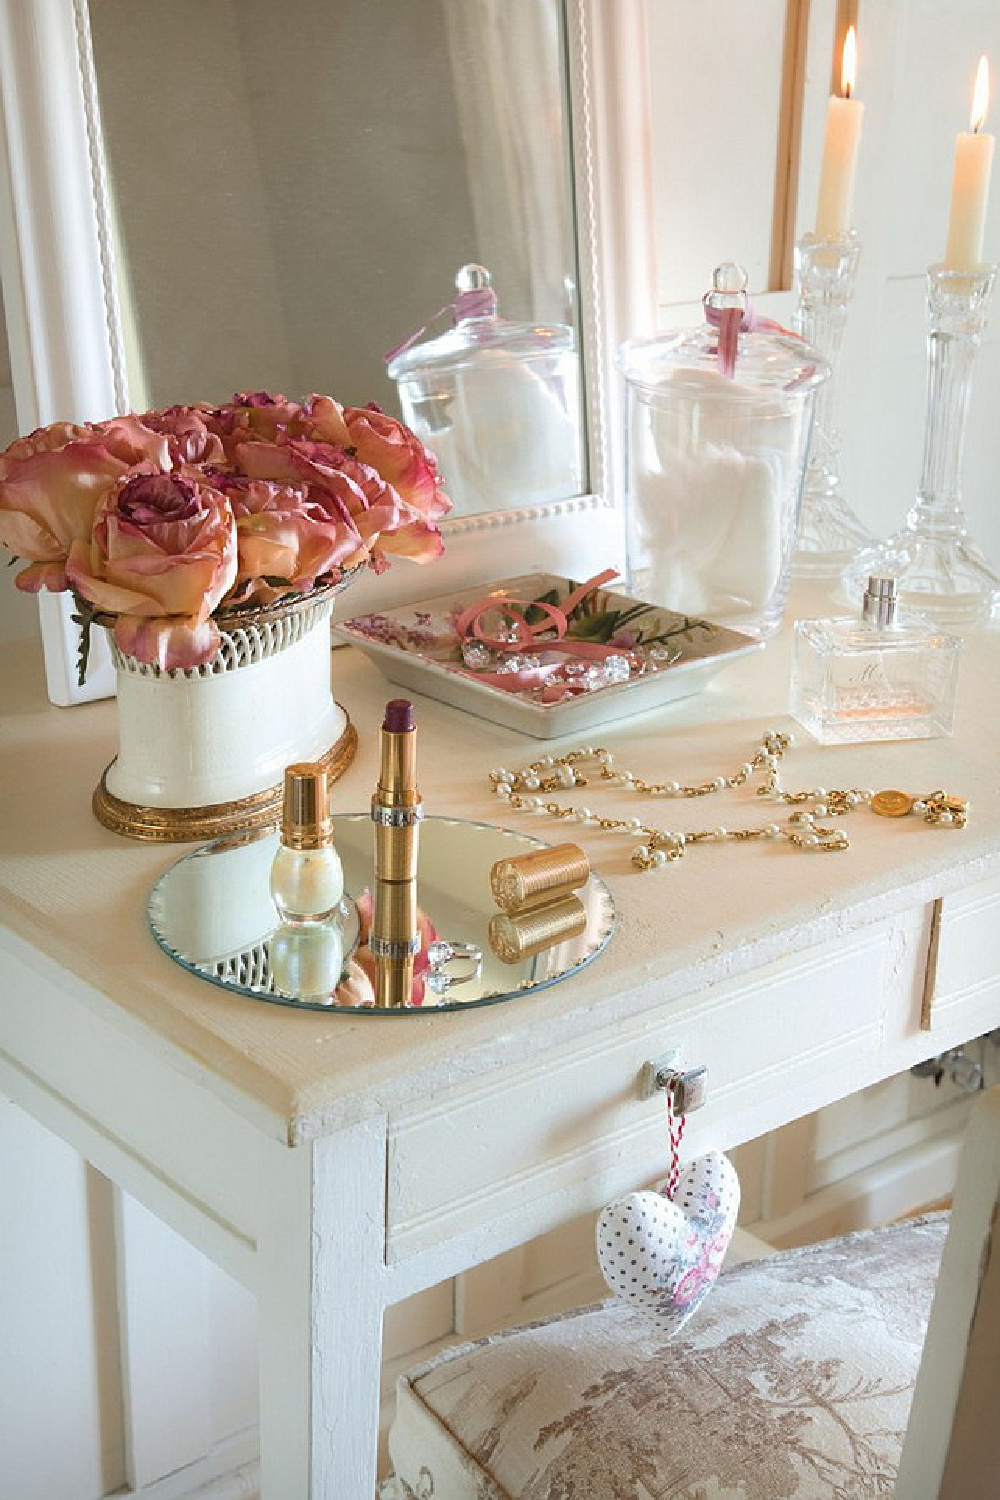 Vanity table in charming cottage in Spain, with French country decor, light green, pink, and holiday decorations - El Mueble magazine.